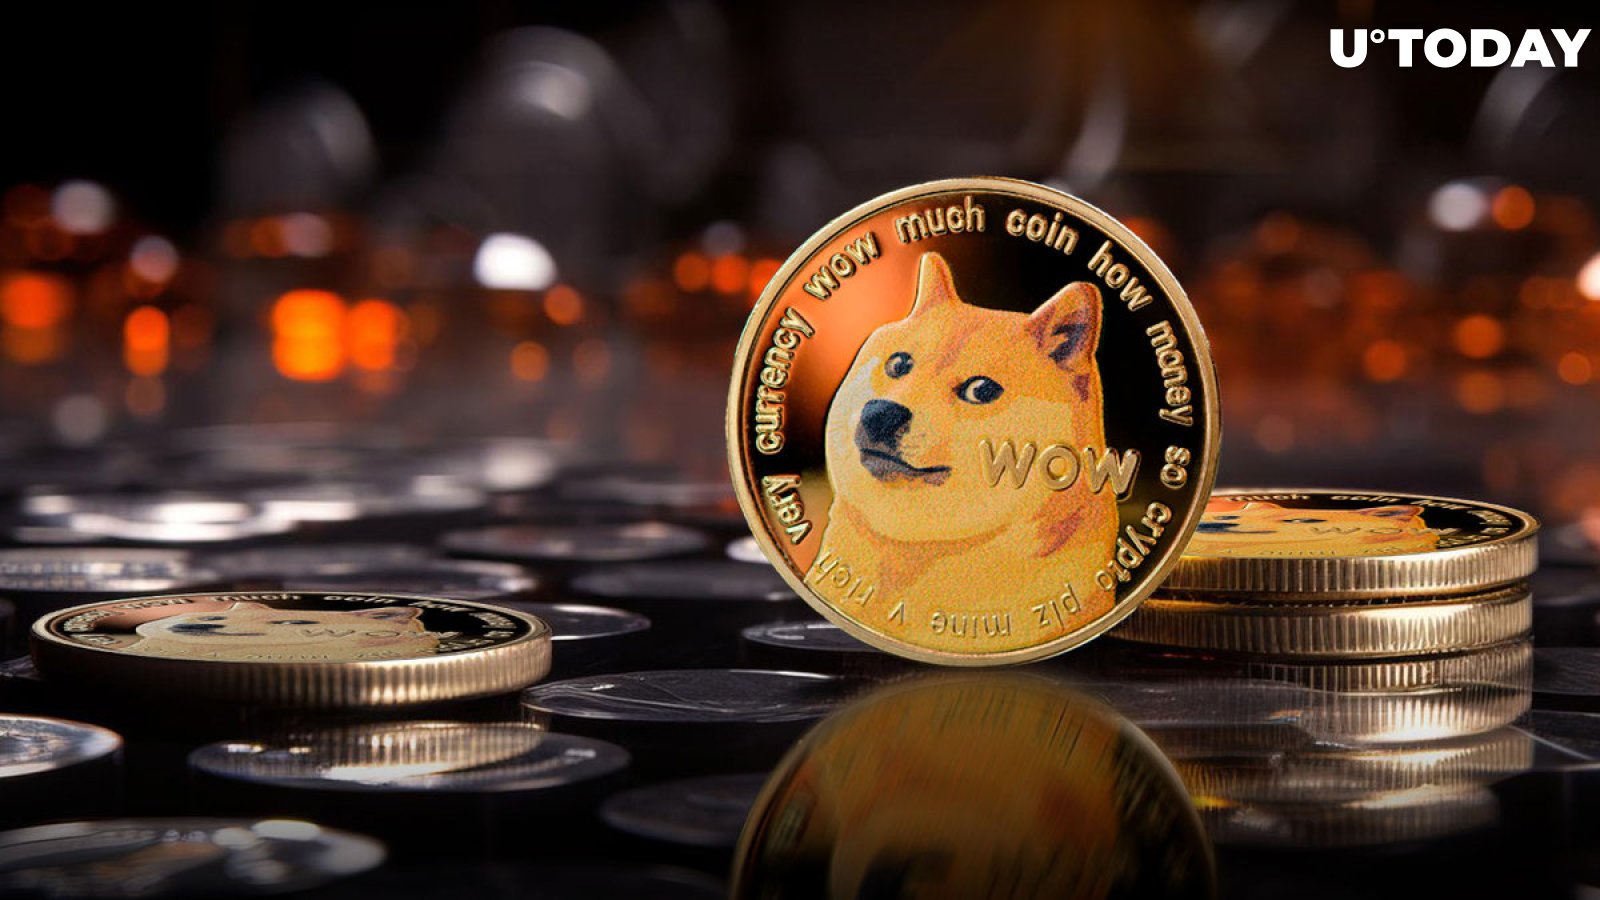 Dogecoin Founder Opposes 'Dark' Crypto Holders 'Diagnosis' From Study: Details